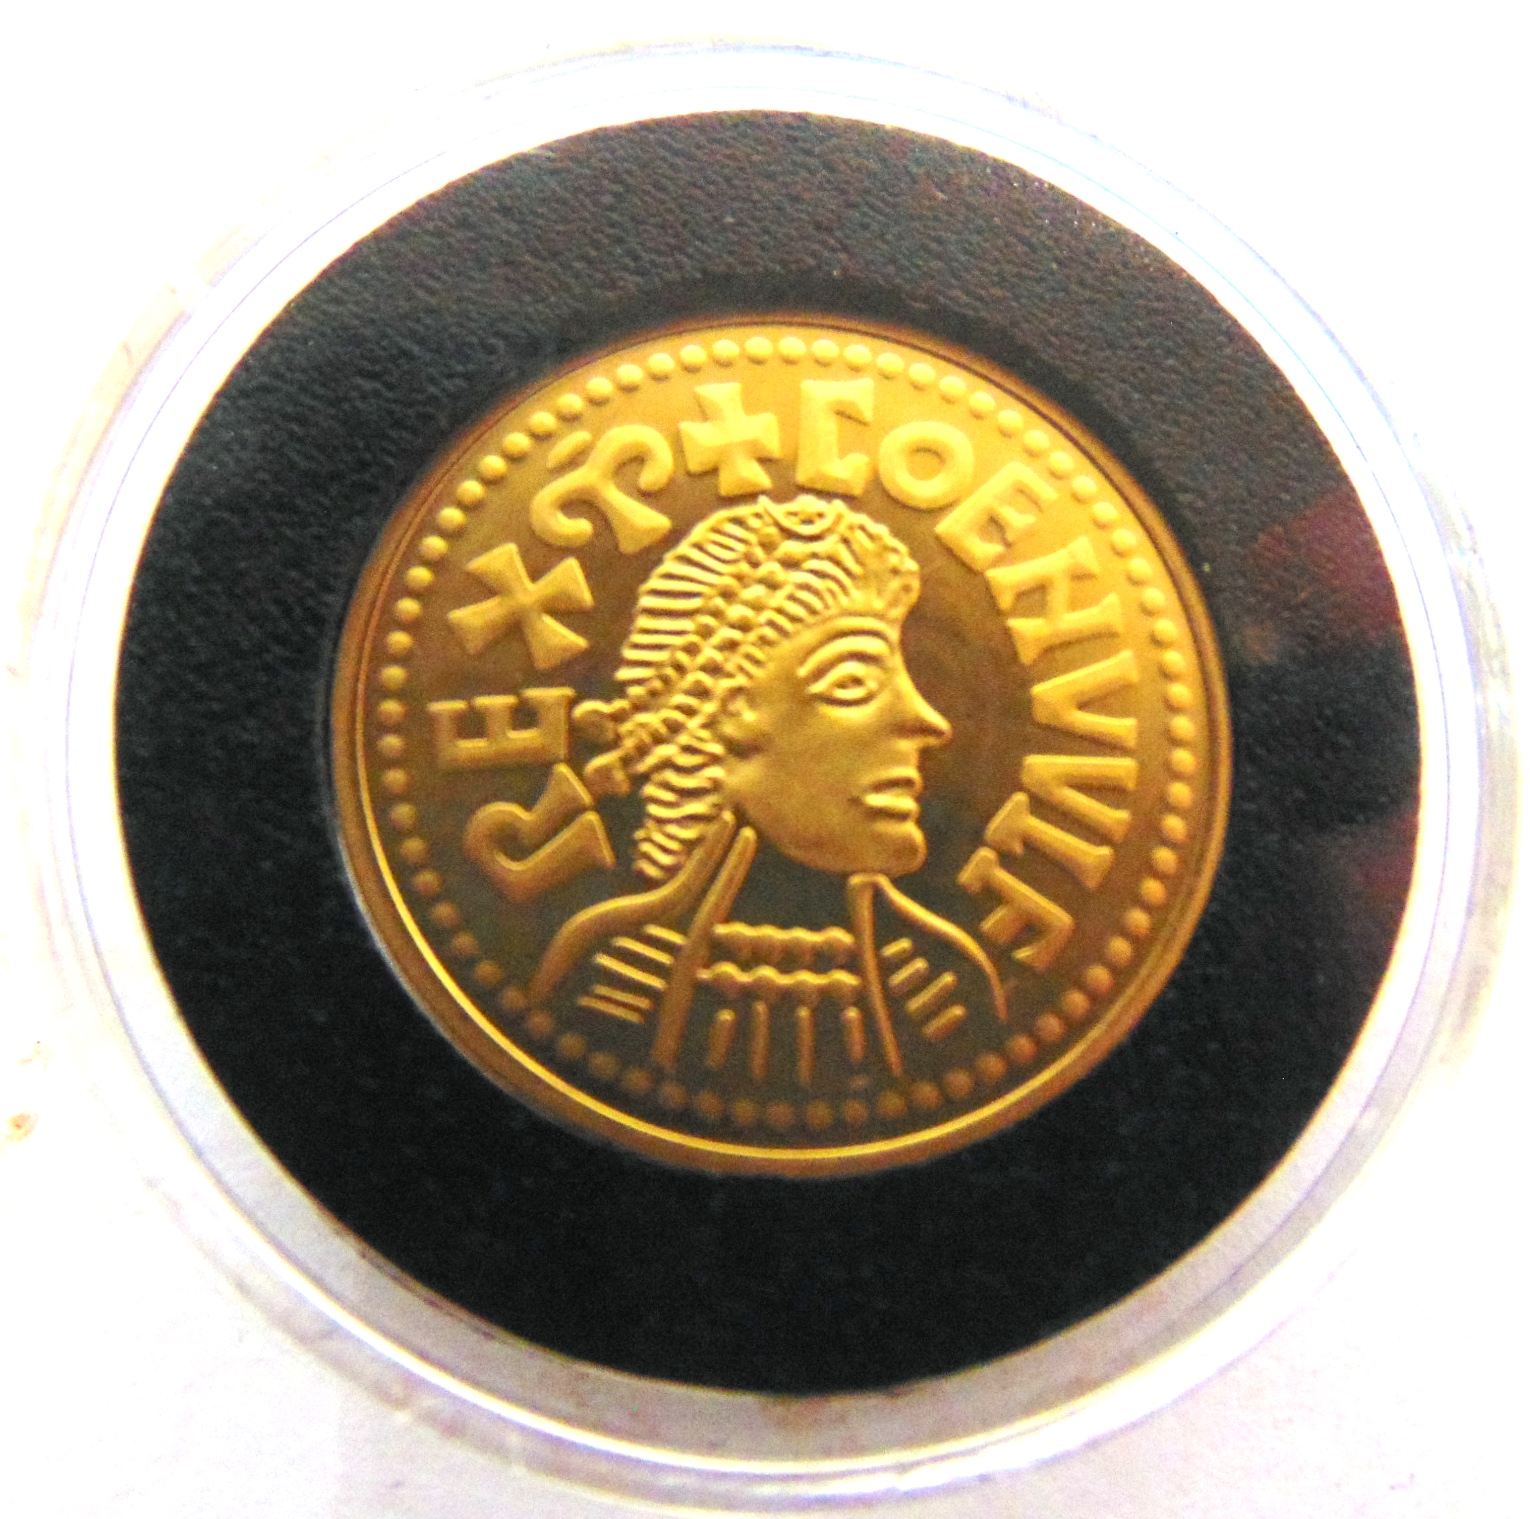 MISCELLANEOUS - A LONDON MINT OFFICE MILLIONAIRES GOLD EDITION COLLECTION REPLICA COENWULF PENNY (